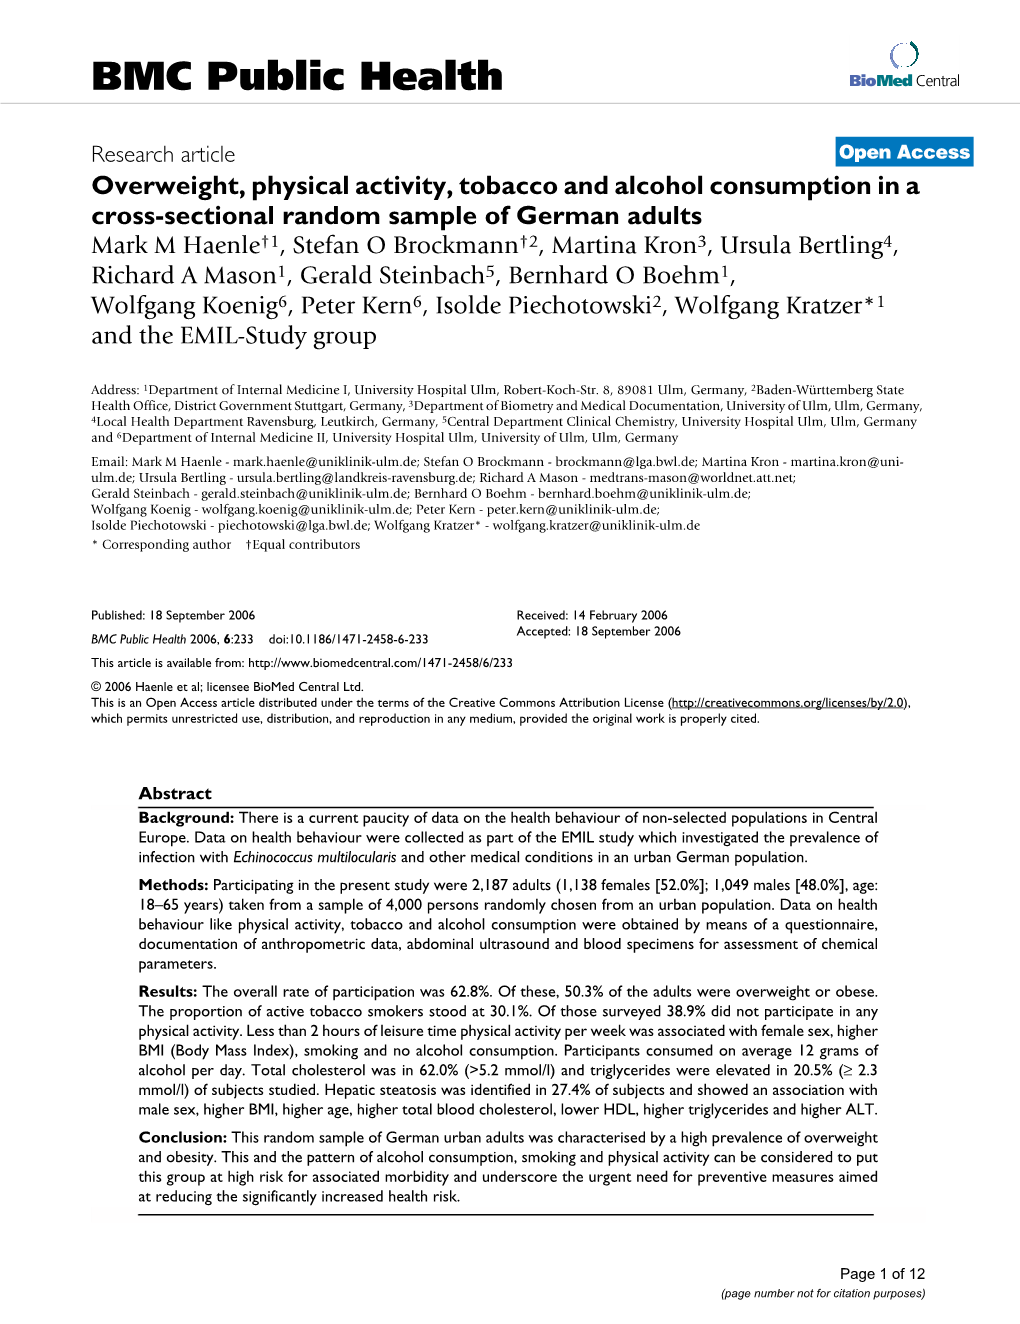 Overweight, Physical Activity, Tobacco and Alcohol Consumption in a Cross